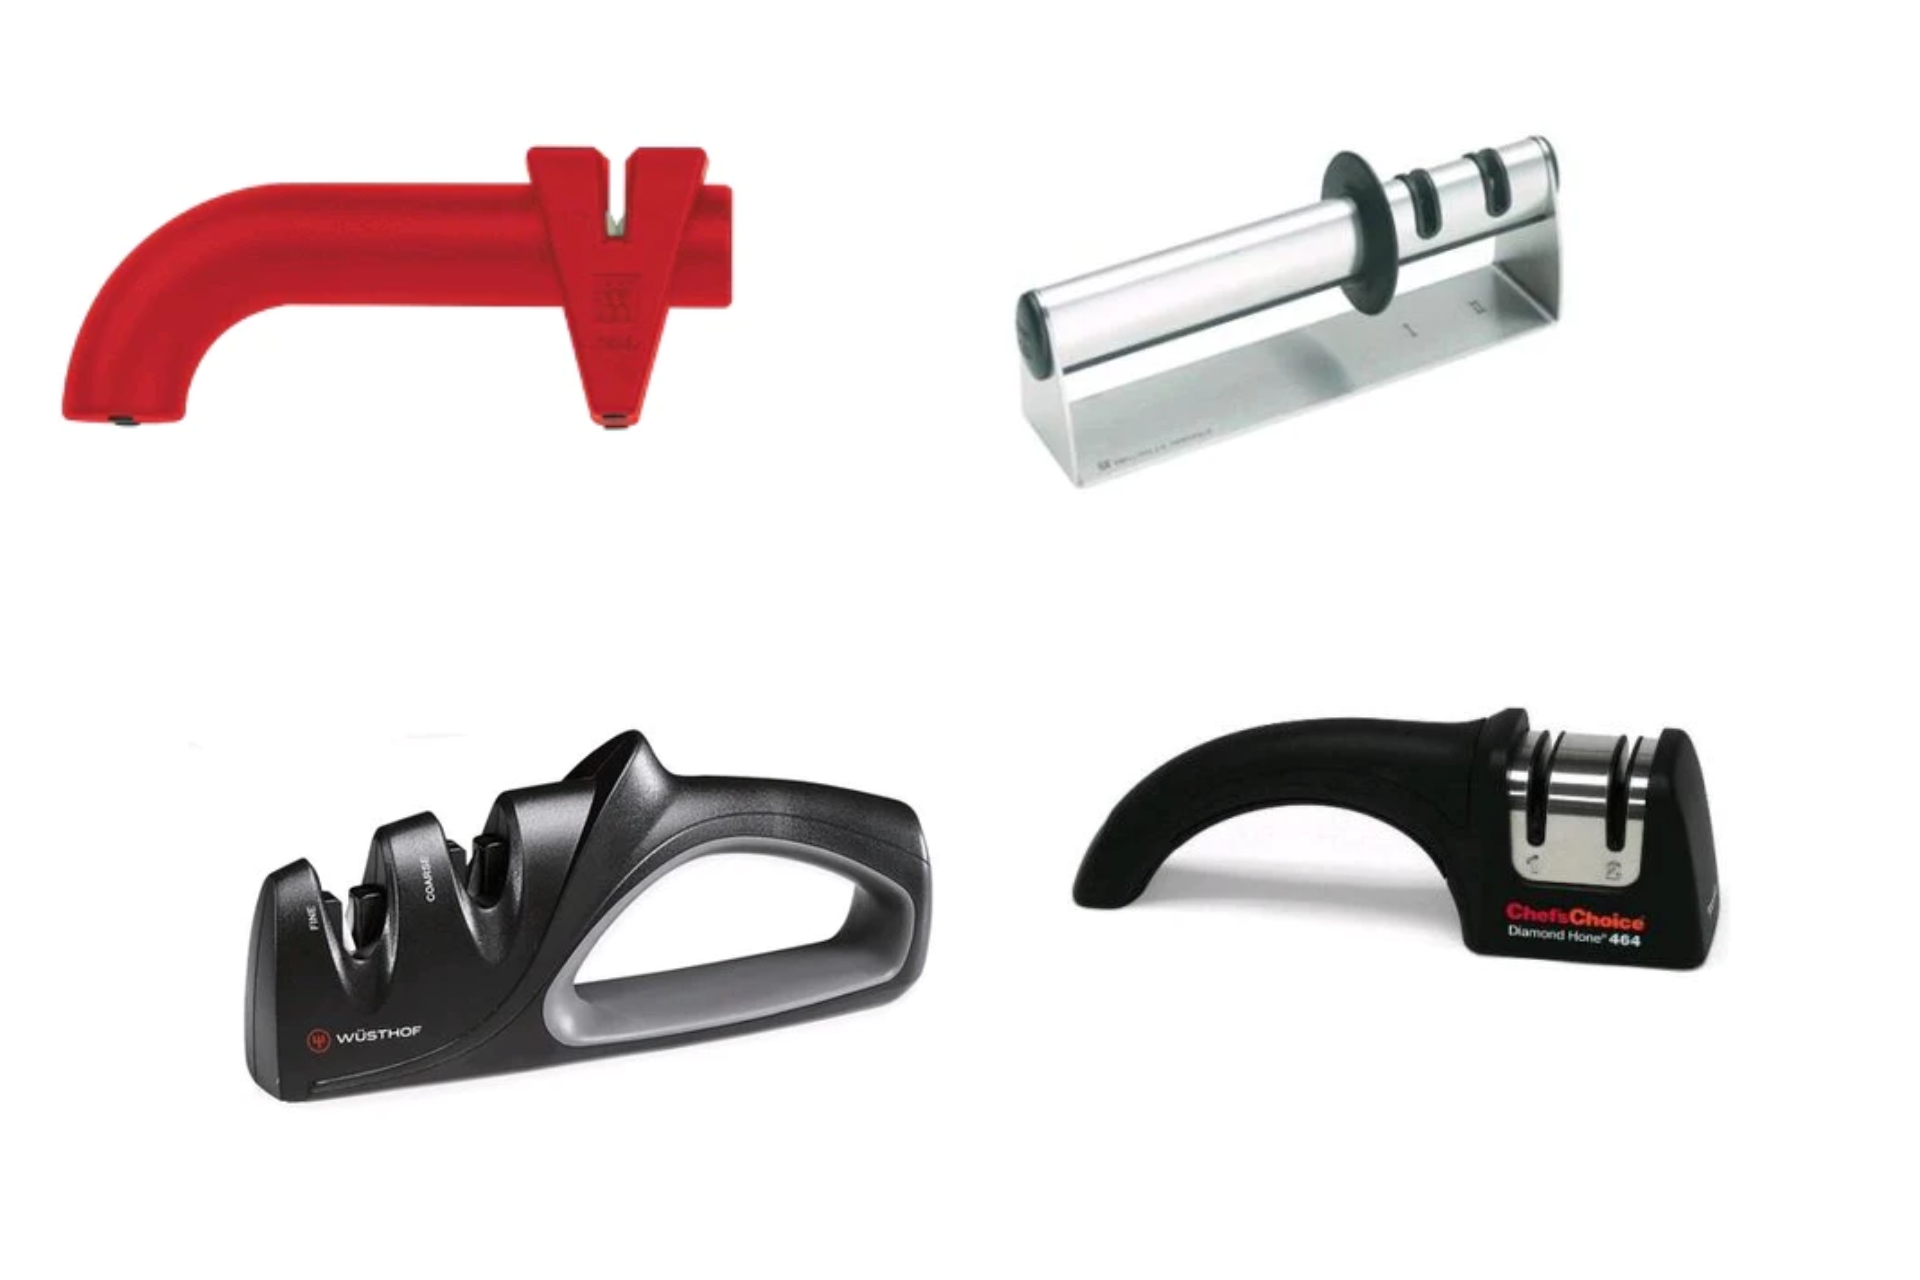 Four of the best manual knife sharpeners from s.t.o.p Restaurant Supply